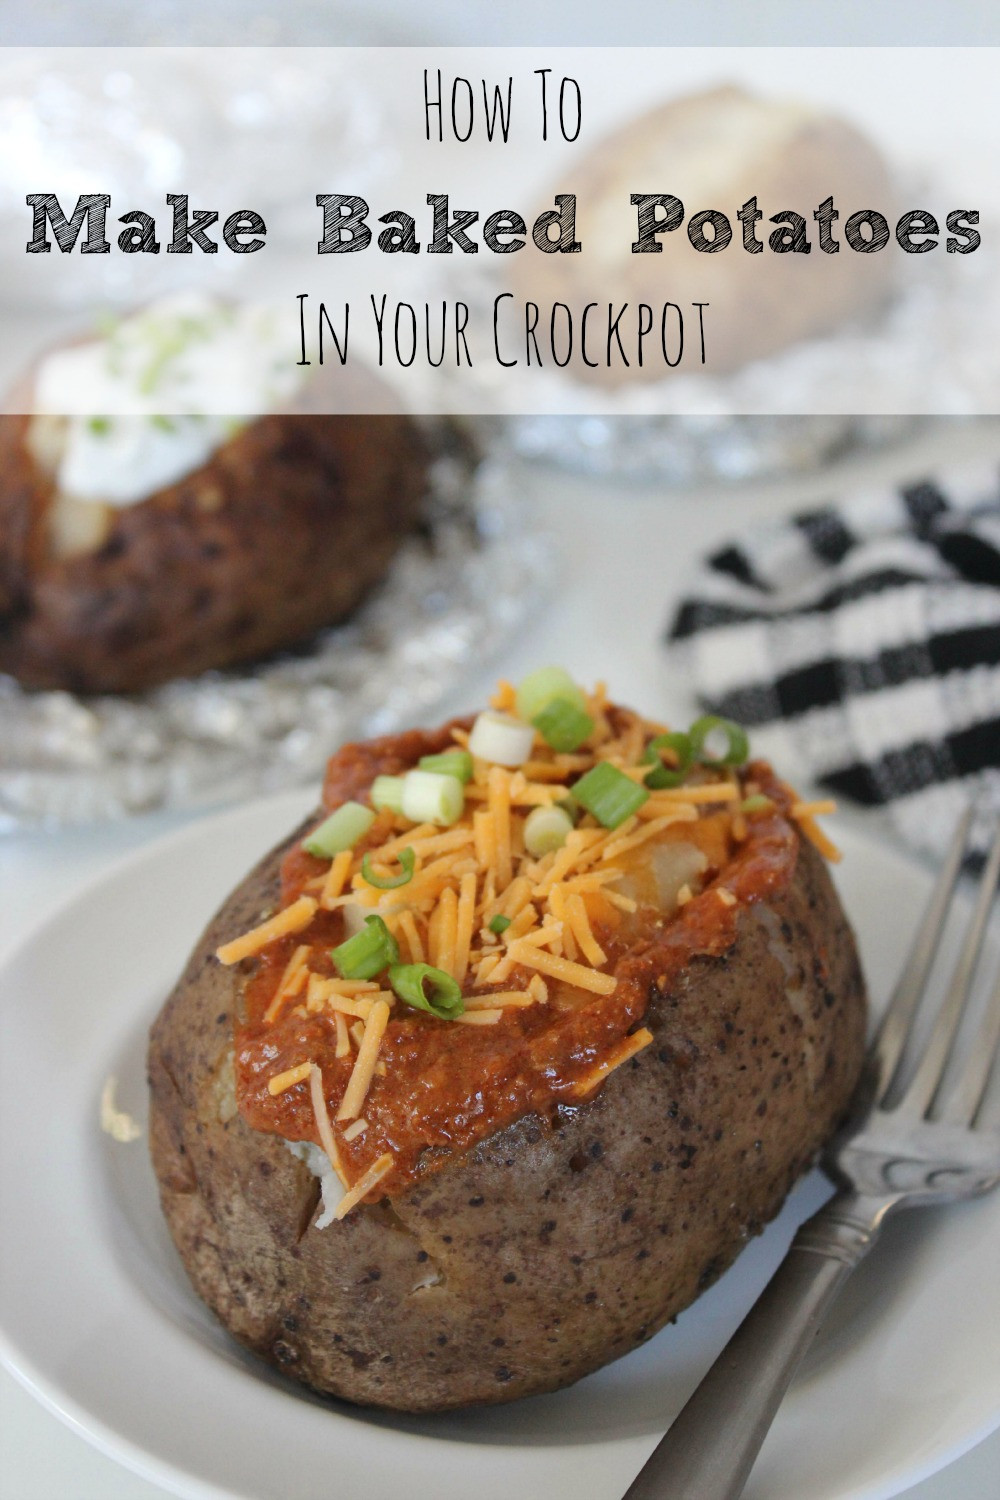 How To Make A Baked Potato
 How To Bake Potatoes in the Crockpot Moms Need To Know